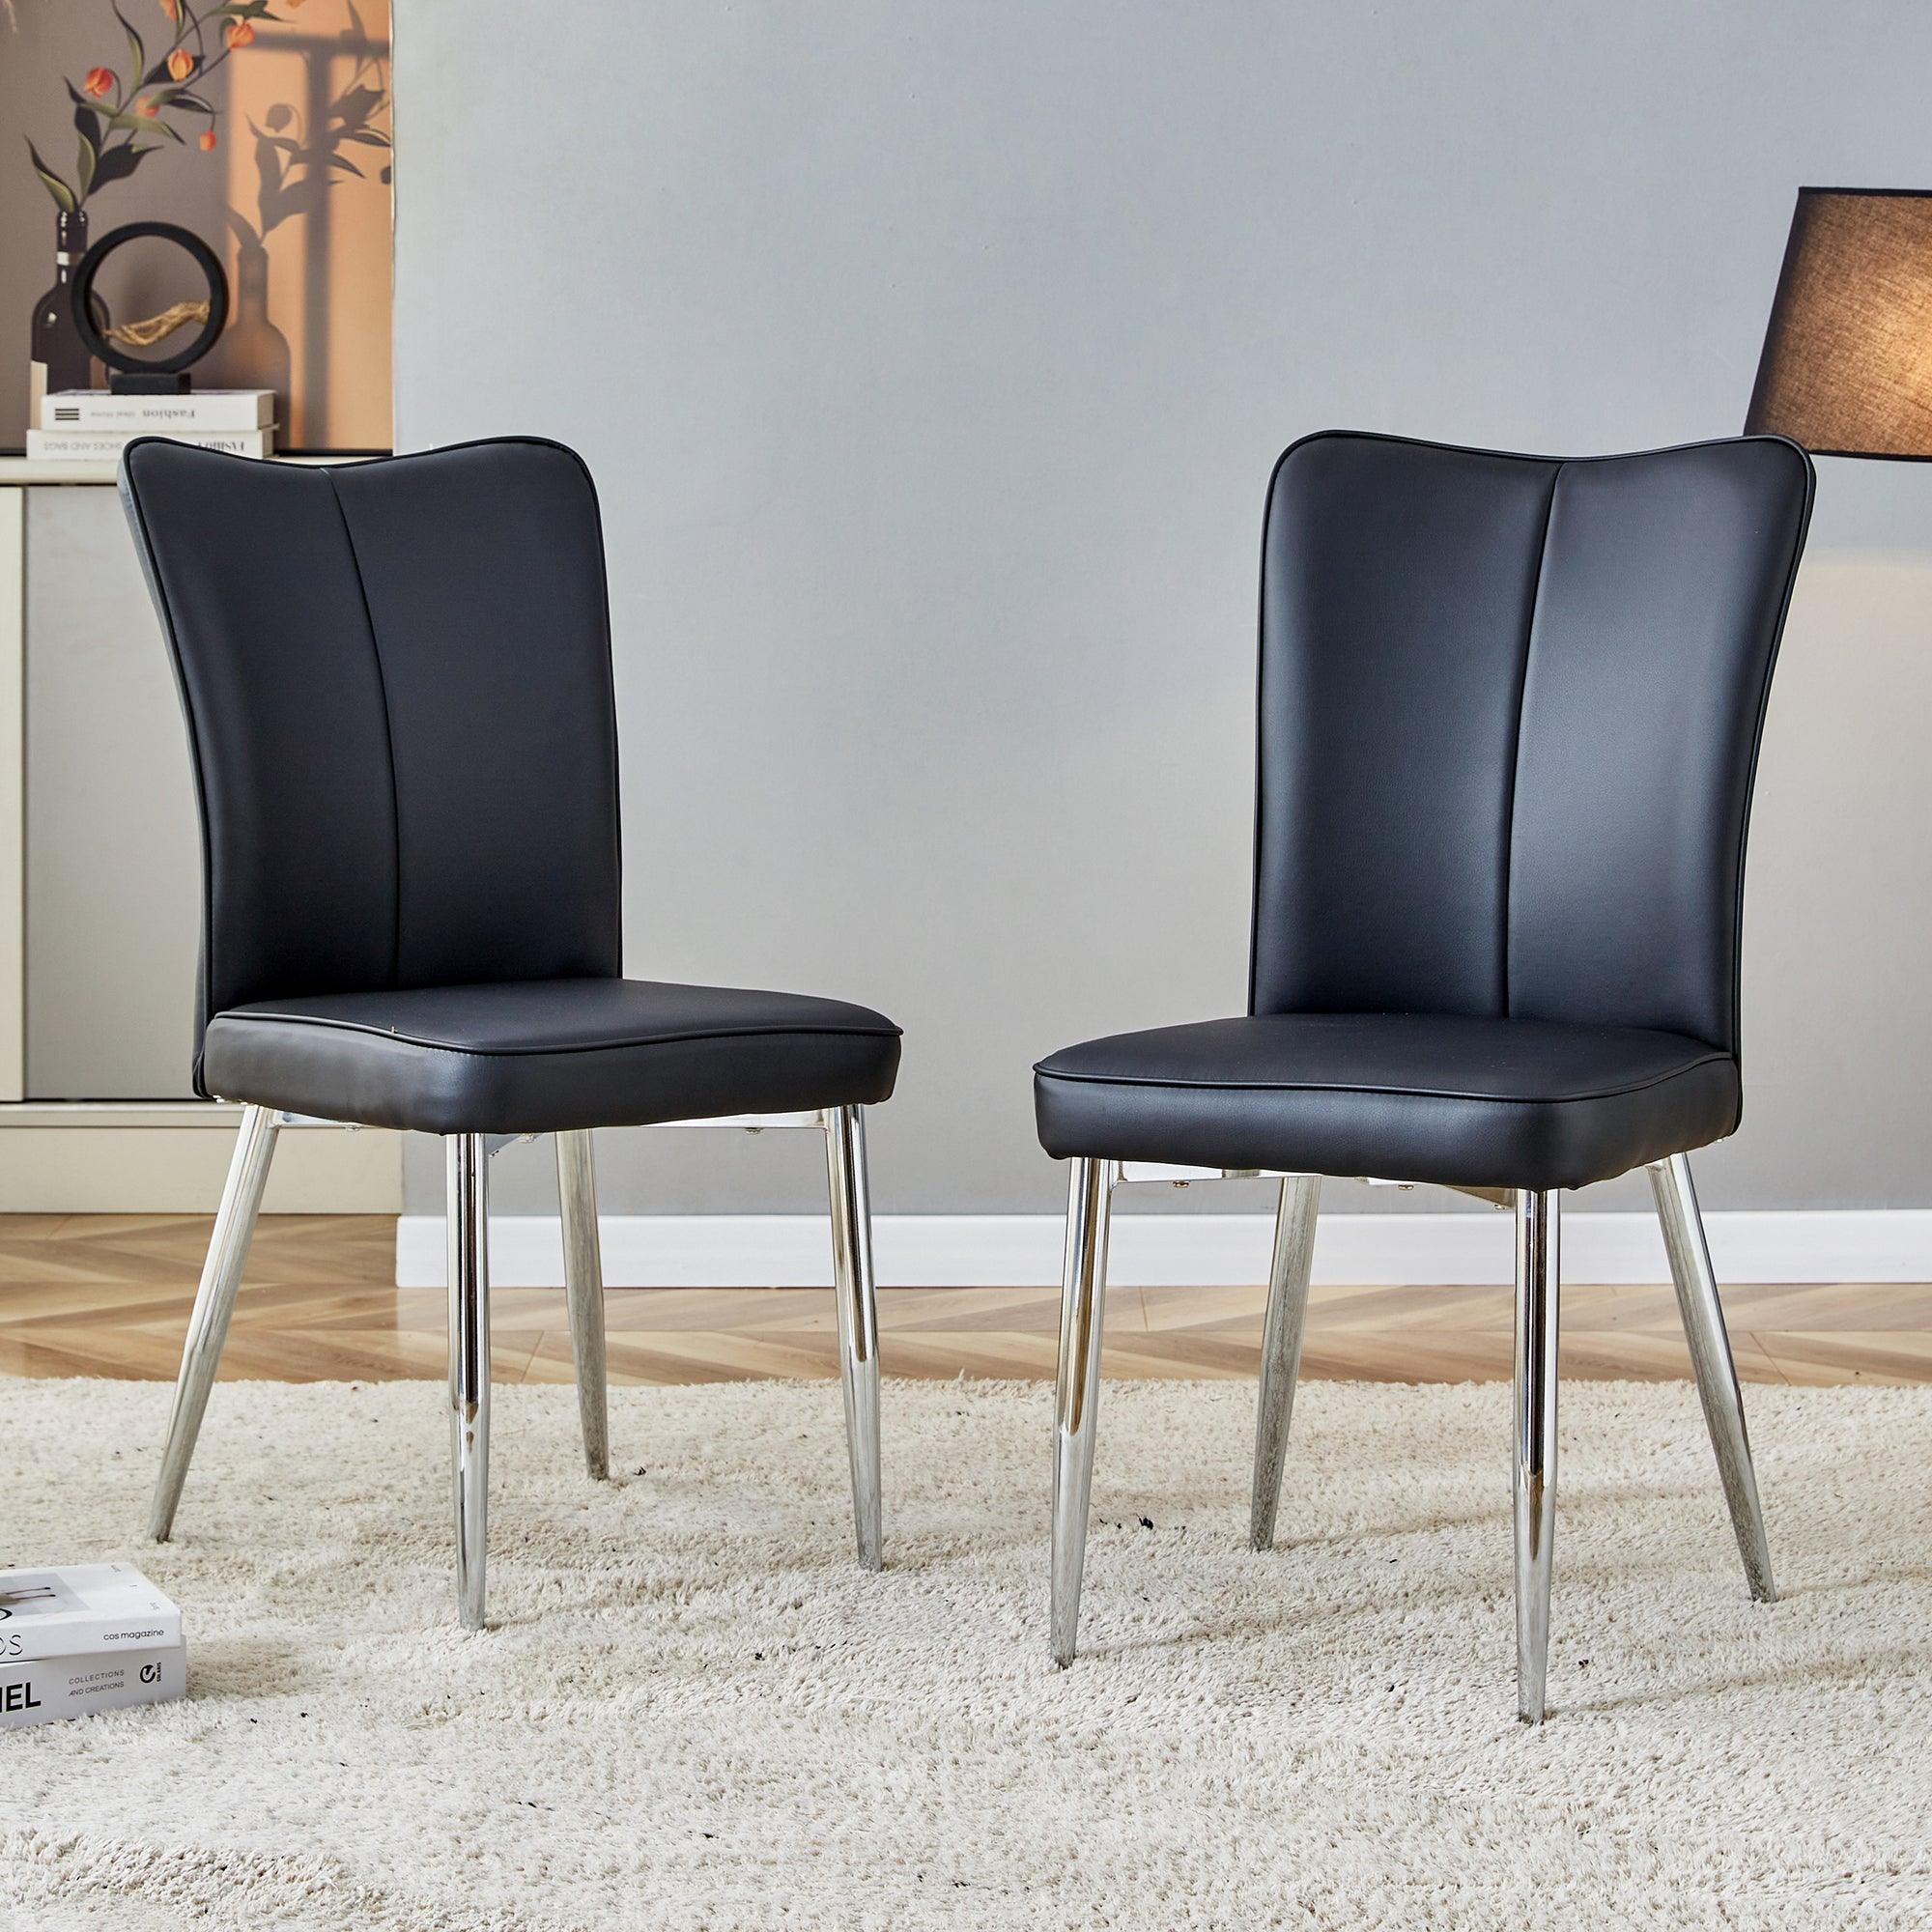 🆓🚛 Modern Minimalist Dining Chairs, Black Pu Leather Curved Backrest & Cushion, Black Metal Semi Matte Chair Legs, Suitable for Restaurants, Bedrooms, & Living Rooms a Set Of 2 Chairs.